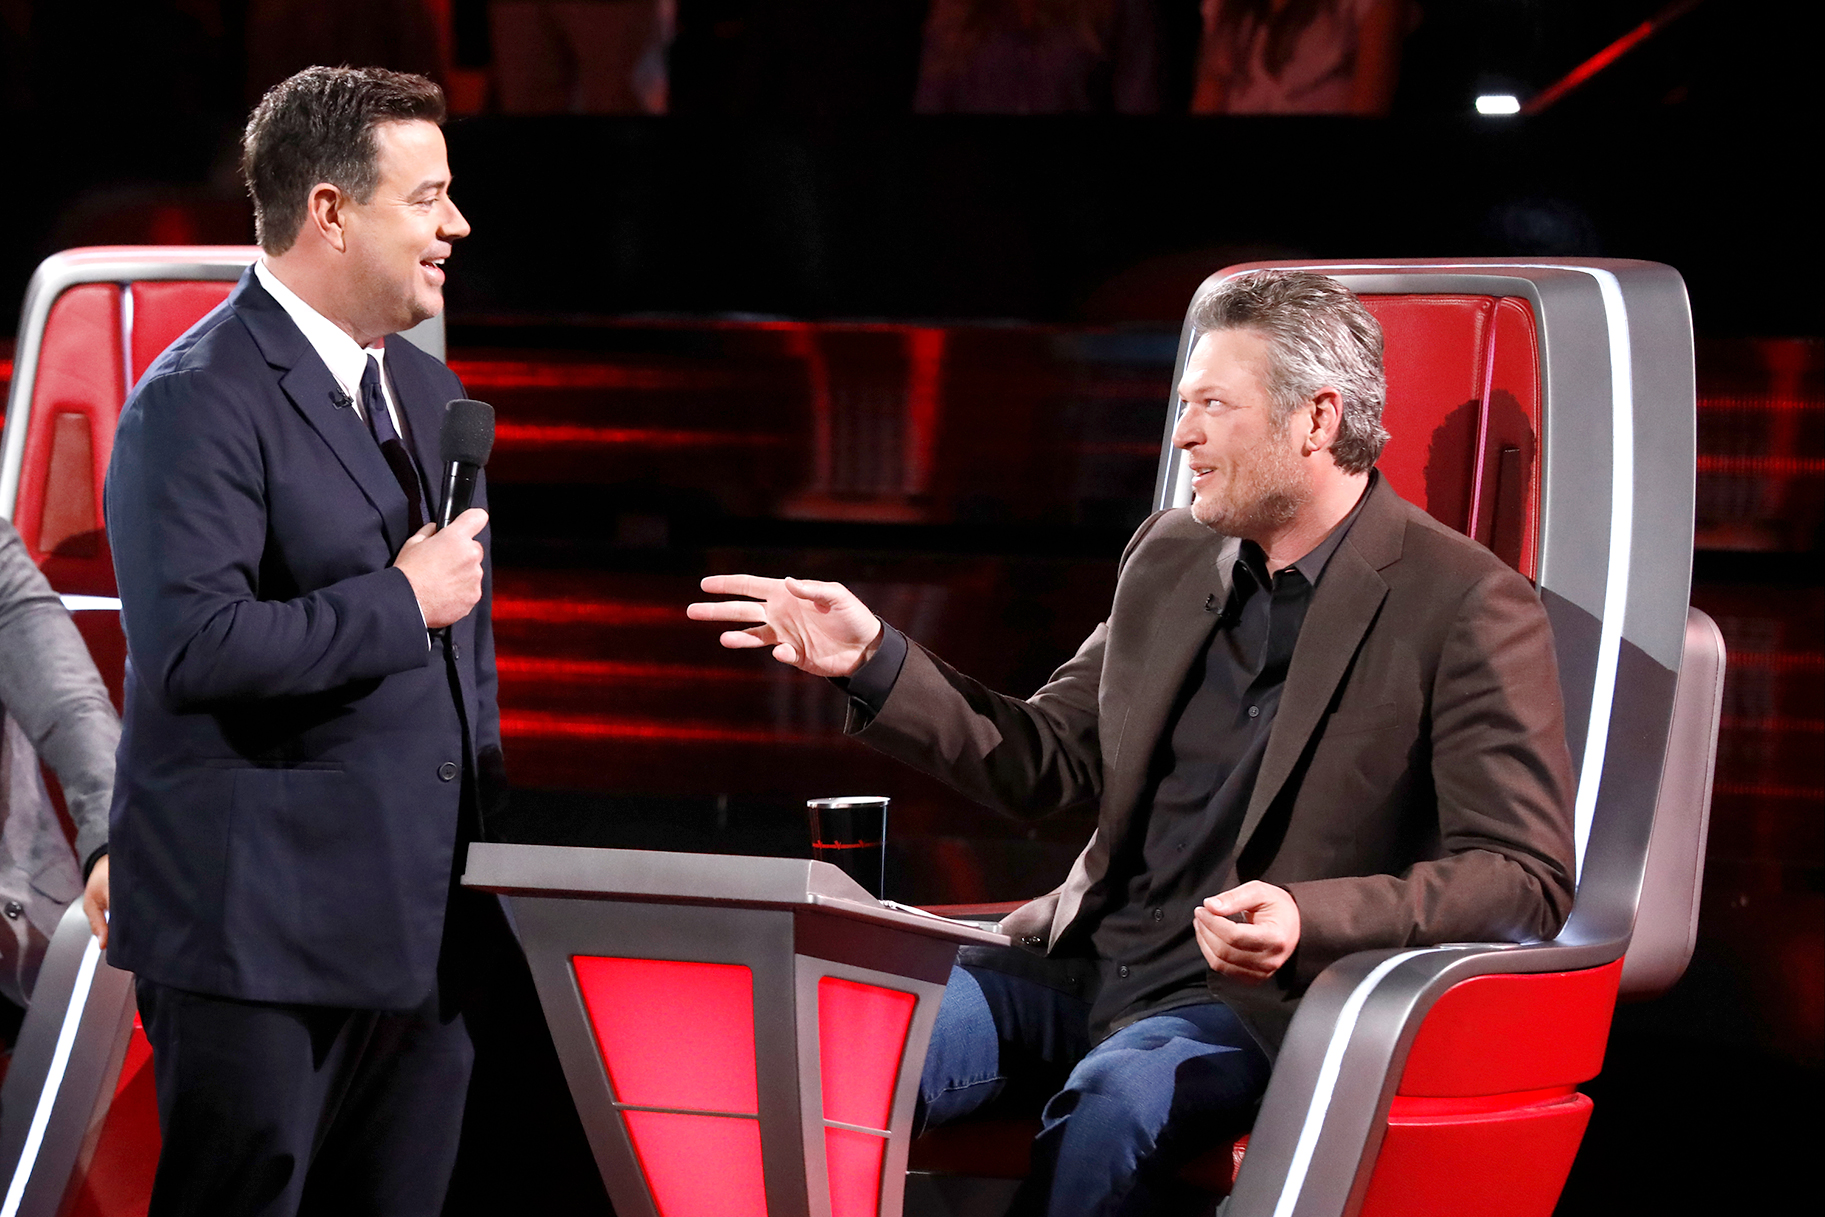 Carson Daly and Blake Shelto Best Moments on The Voice